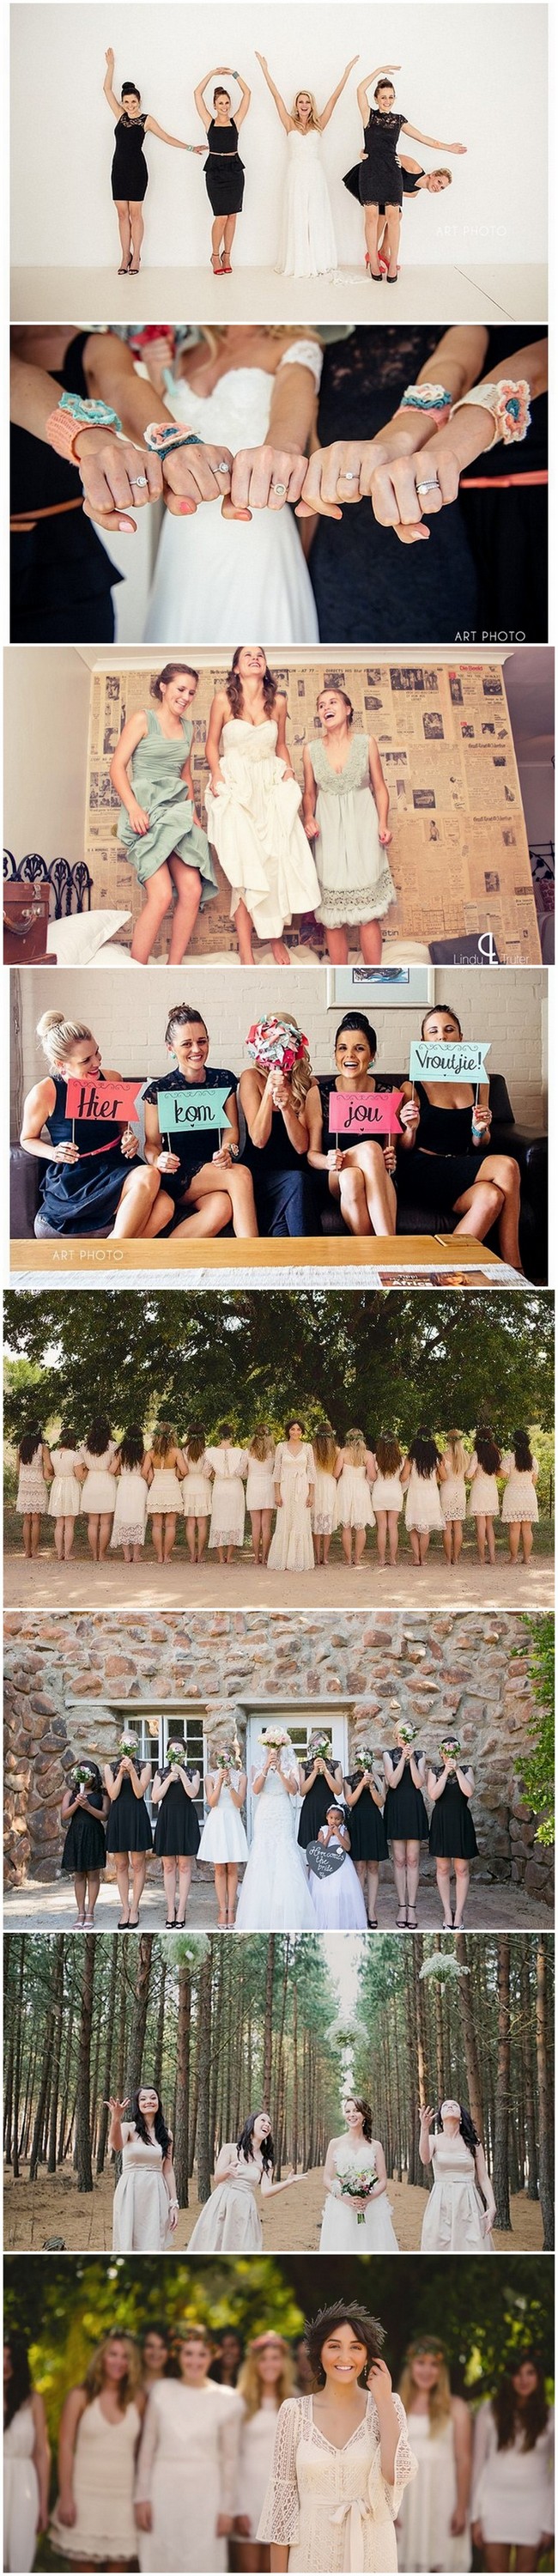 30 Totally Fun Wedding Photo Ideas and Poses for Your Wedding Party: https://confettidaydreams.com/wedding-photo-ideas-and-poses-for-your-wedding-party